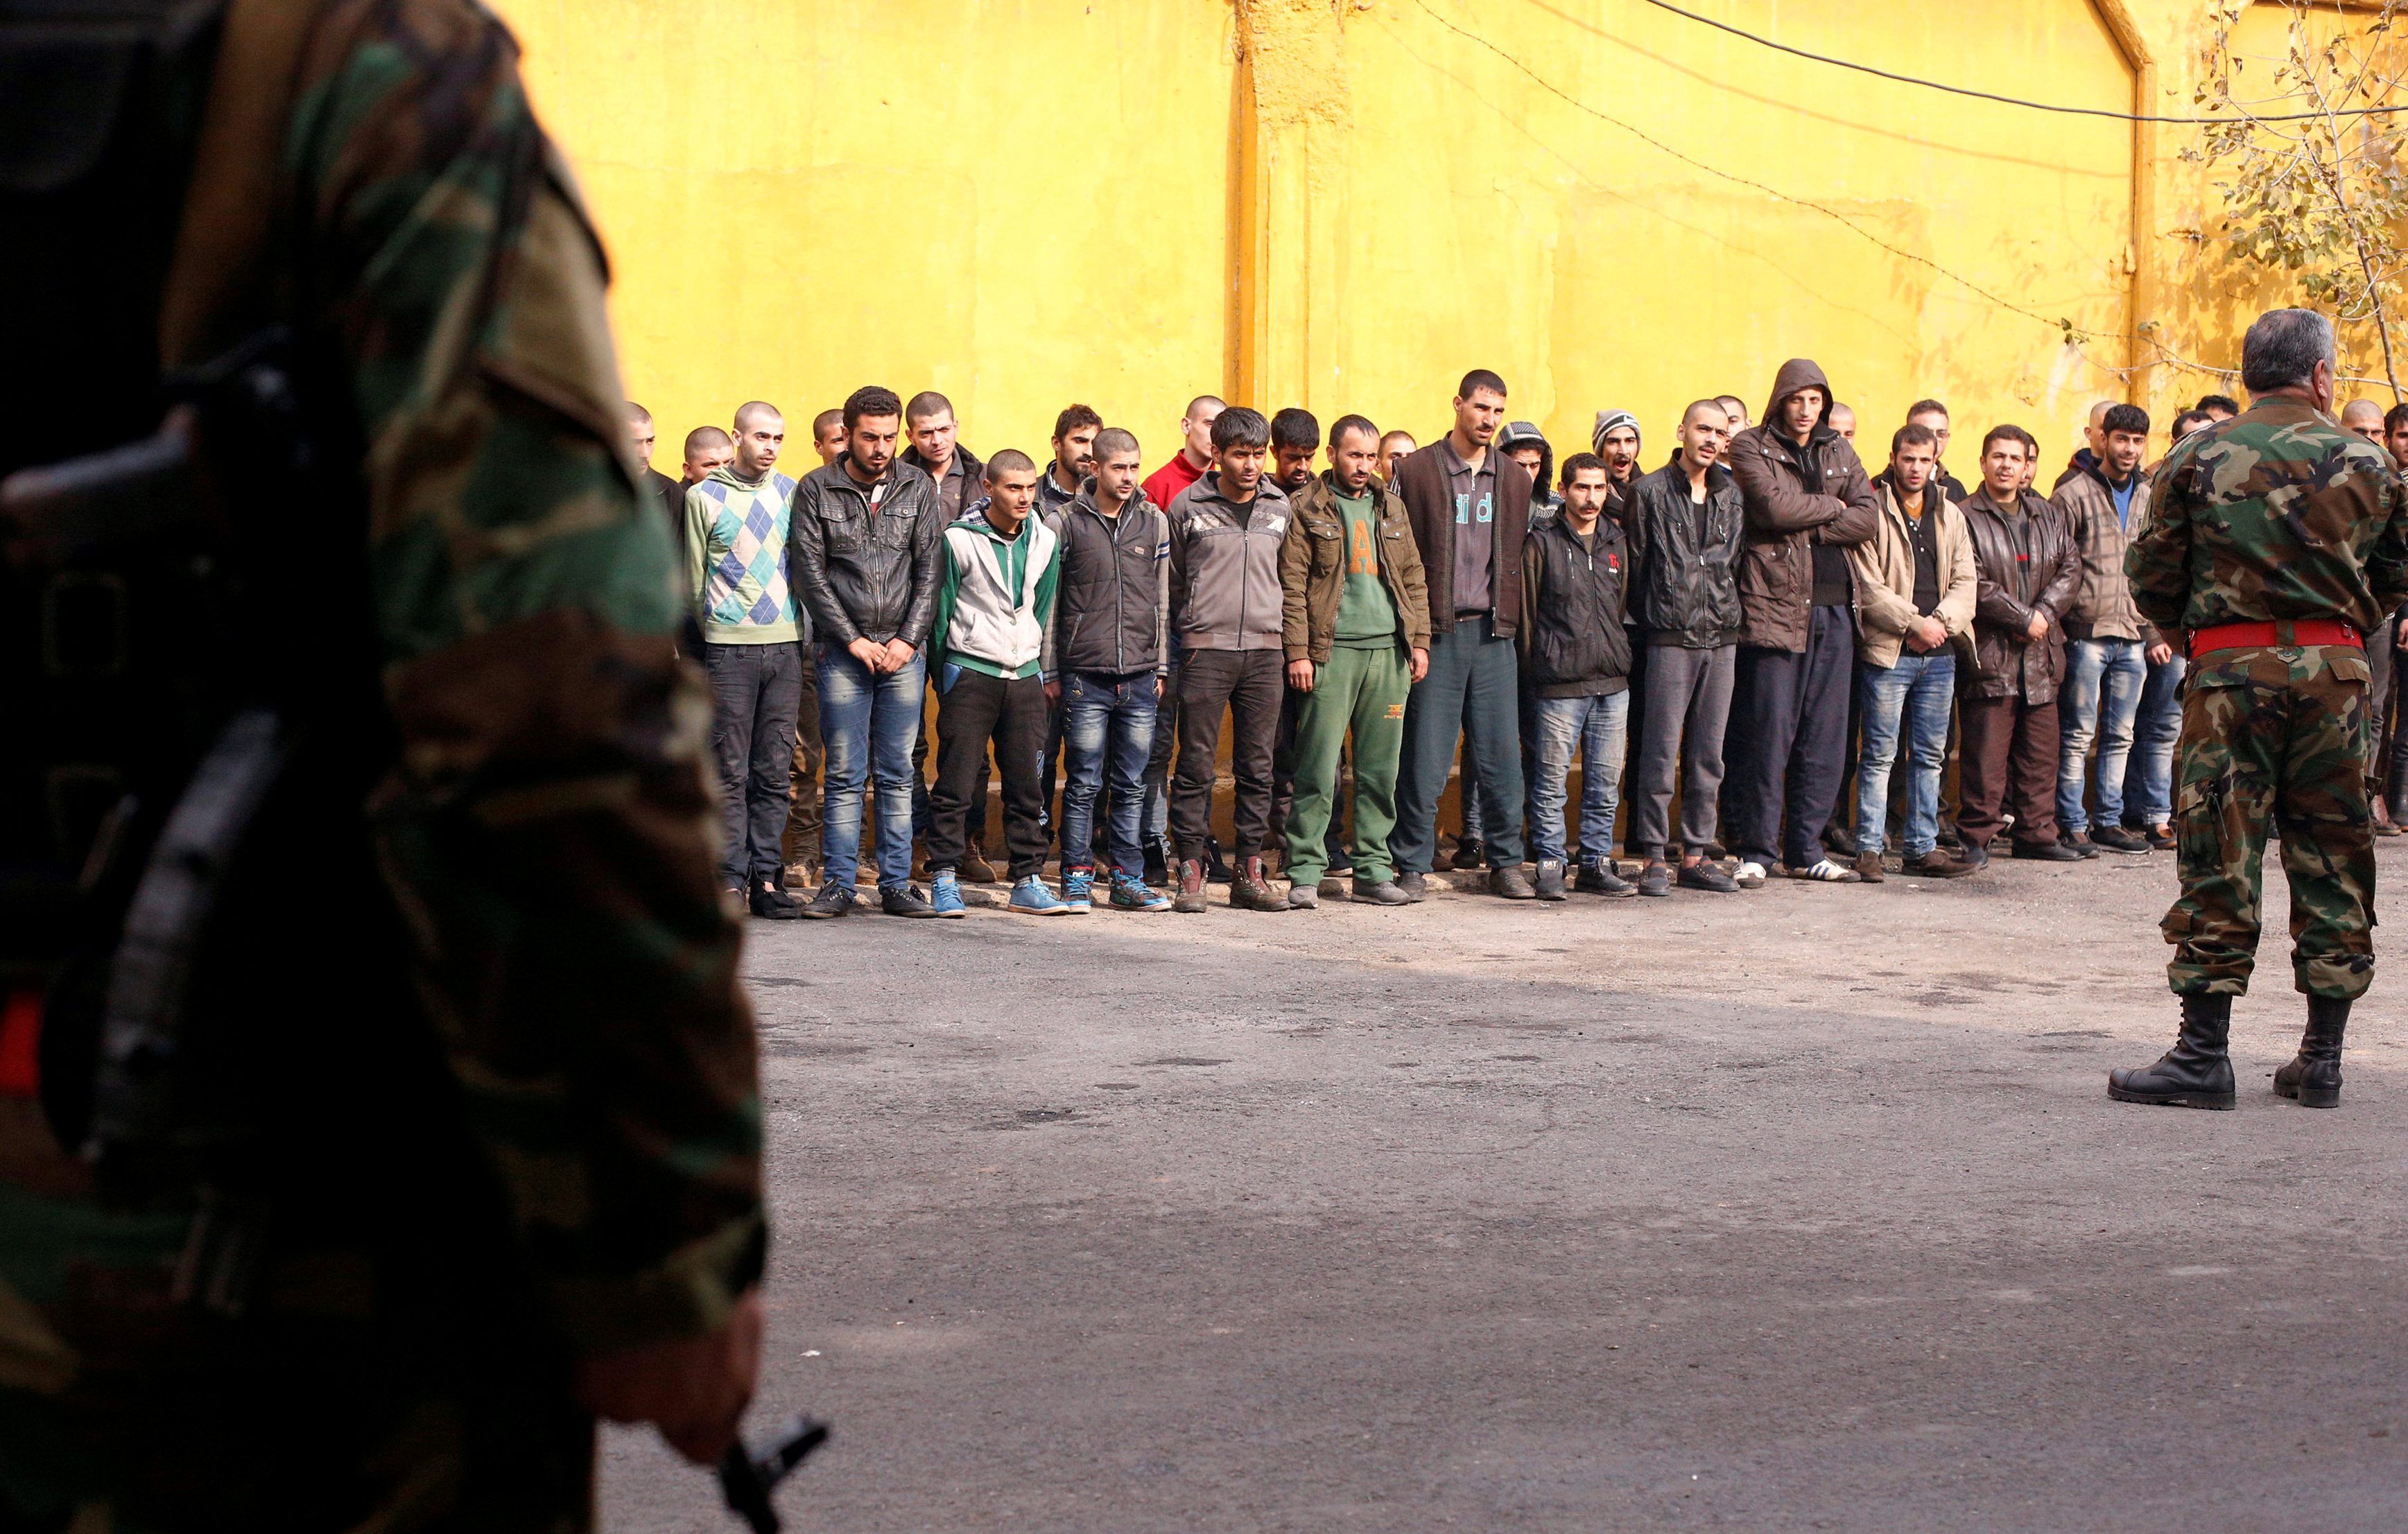 Compulsory Military Conscription in Syria Drives Many Males into Exile 